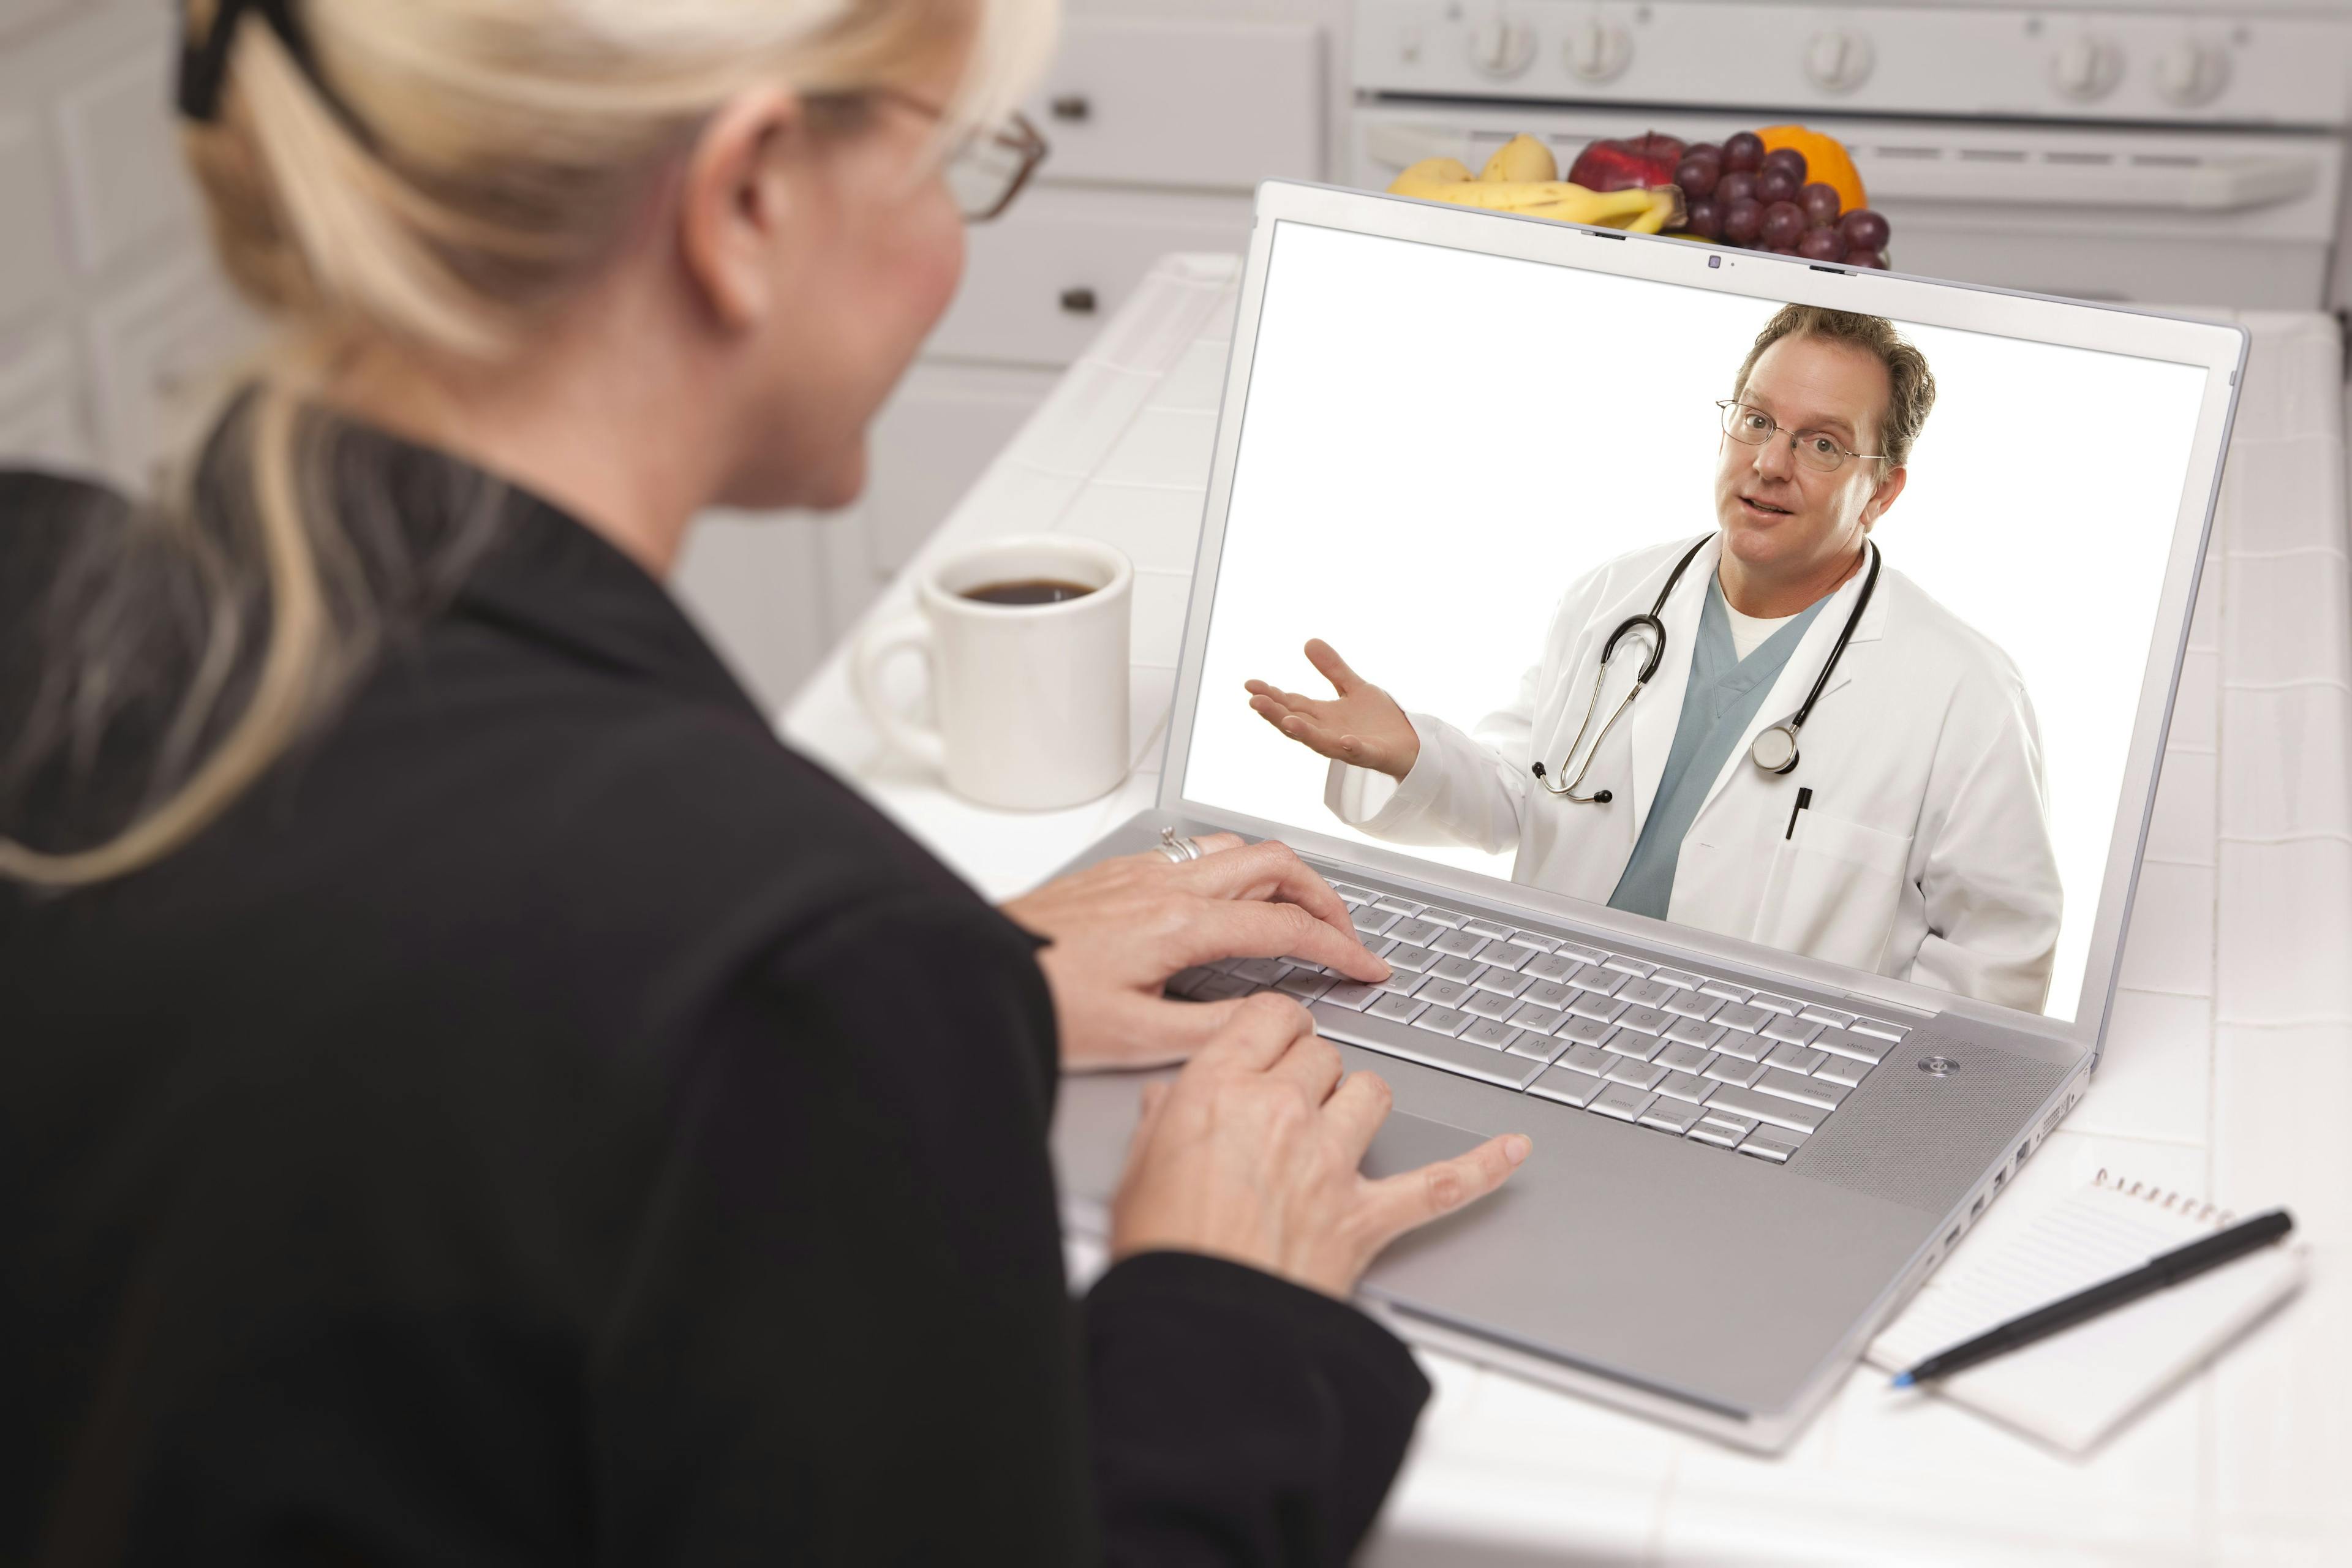 Patient in telehealth session on a computer.